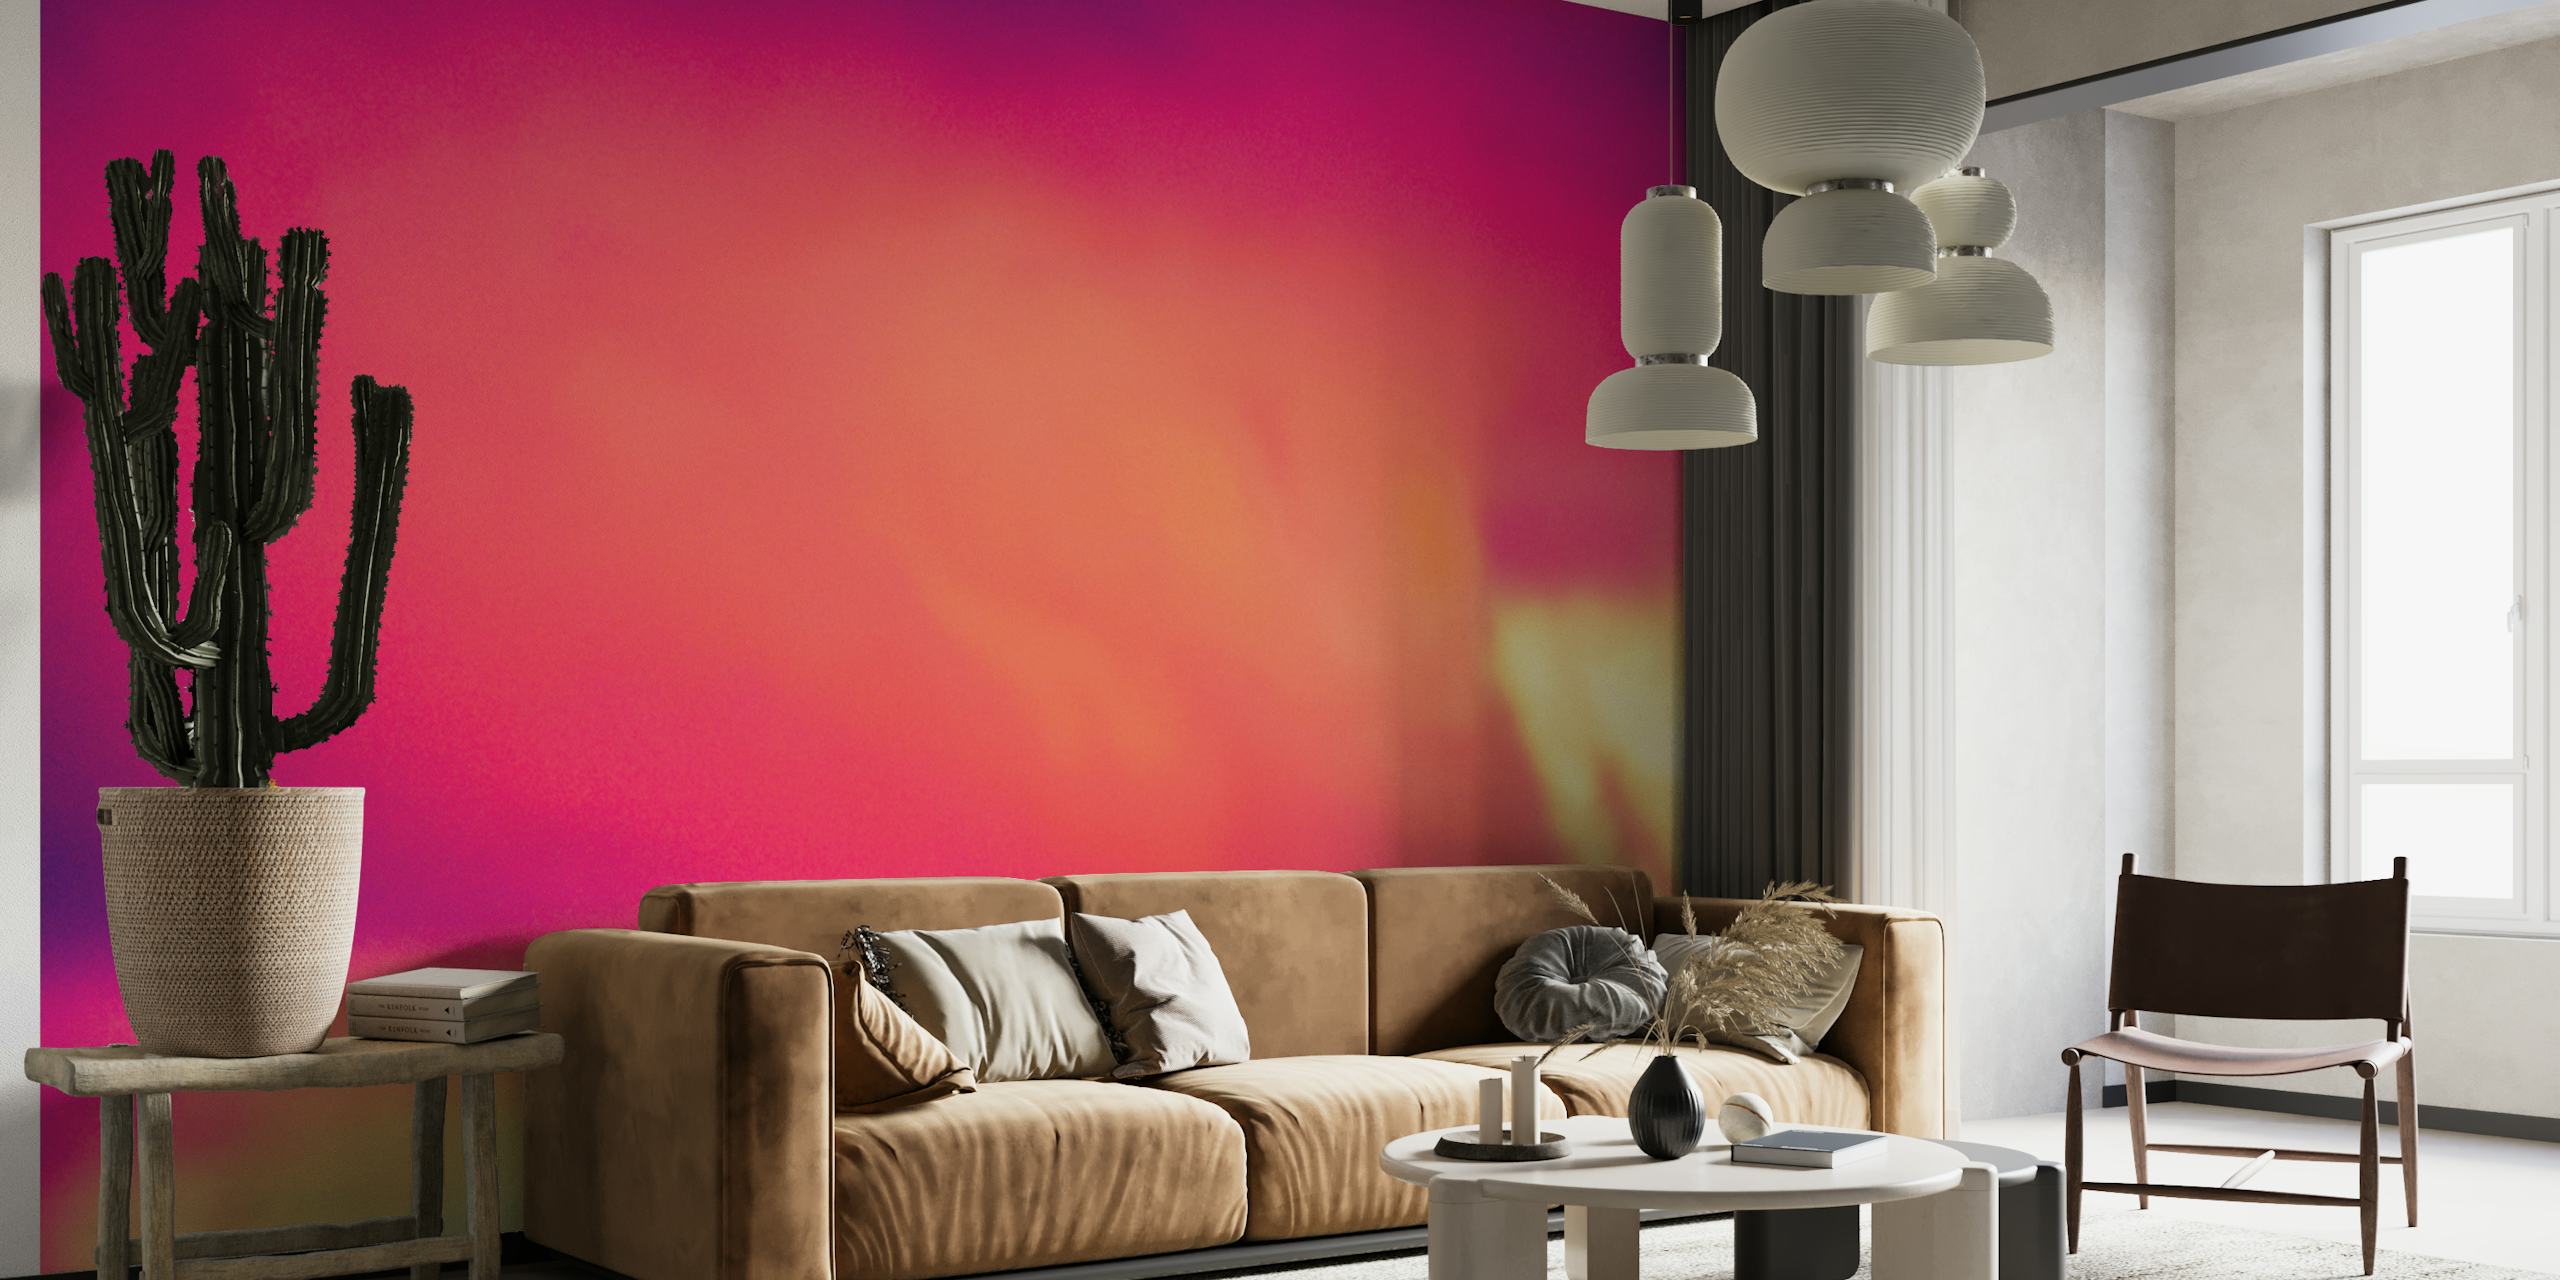 Dreamy pink and purple clouds wall mural